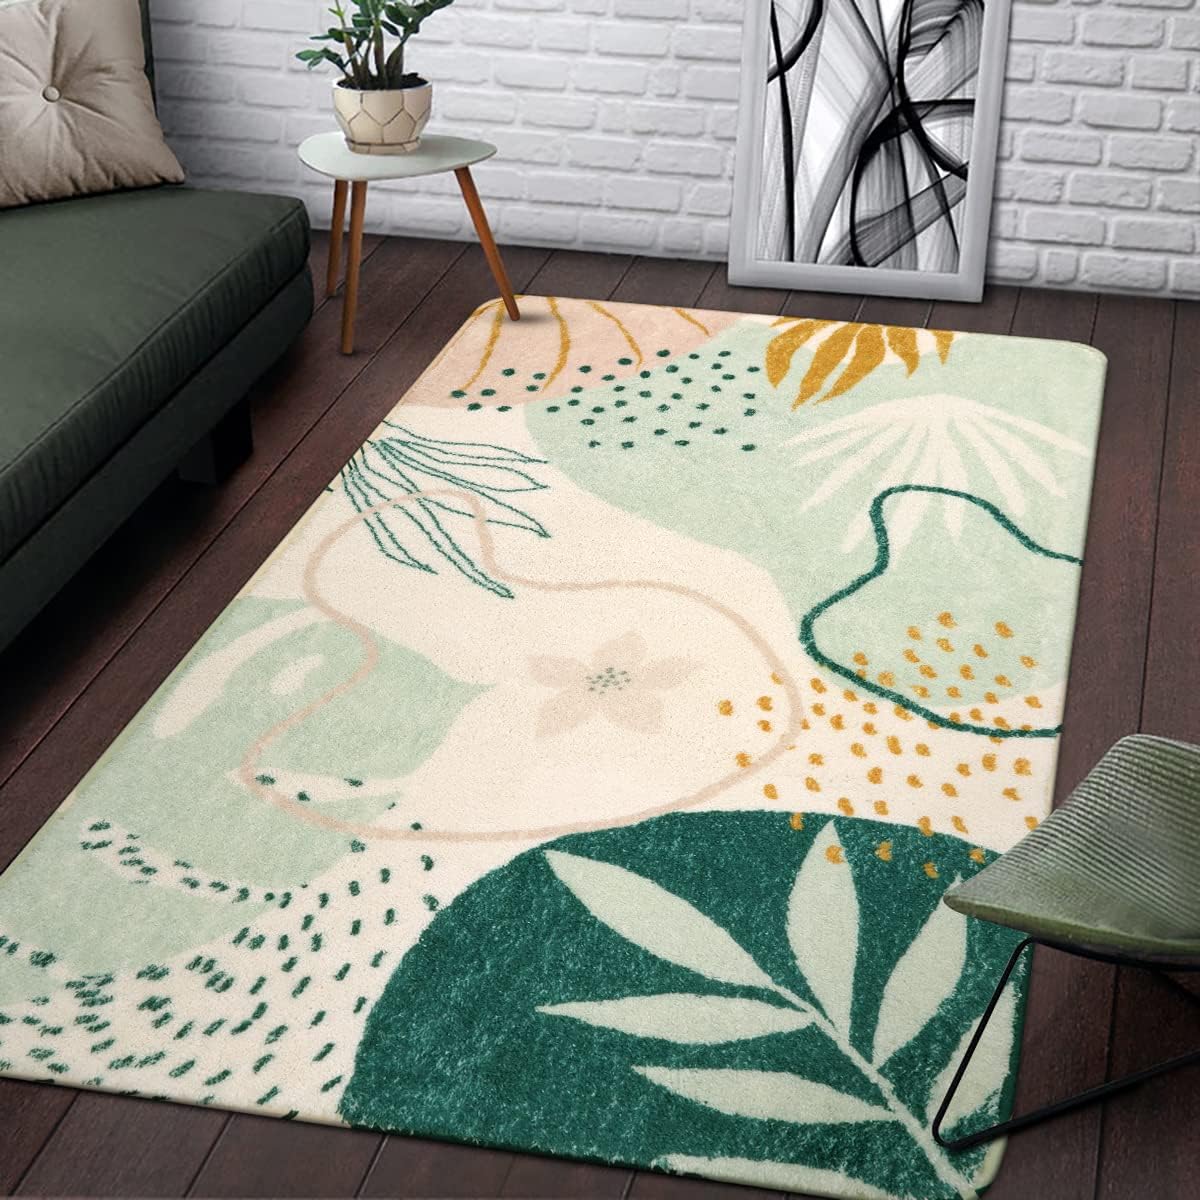 Lahome Green Botanical Print Small Throw Rugs Modern Abstract Non-Slip 3x5 Minimalist Art Area Rug Accent Distressed WashableFloor Carpet for Living Room Bedroom Entryway